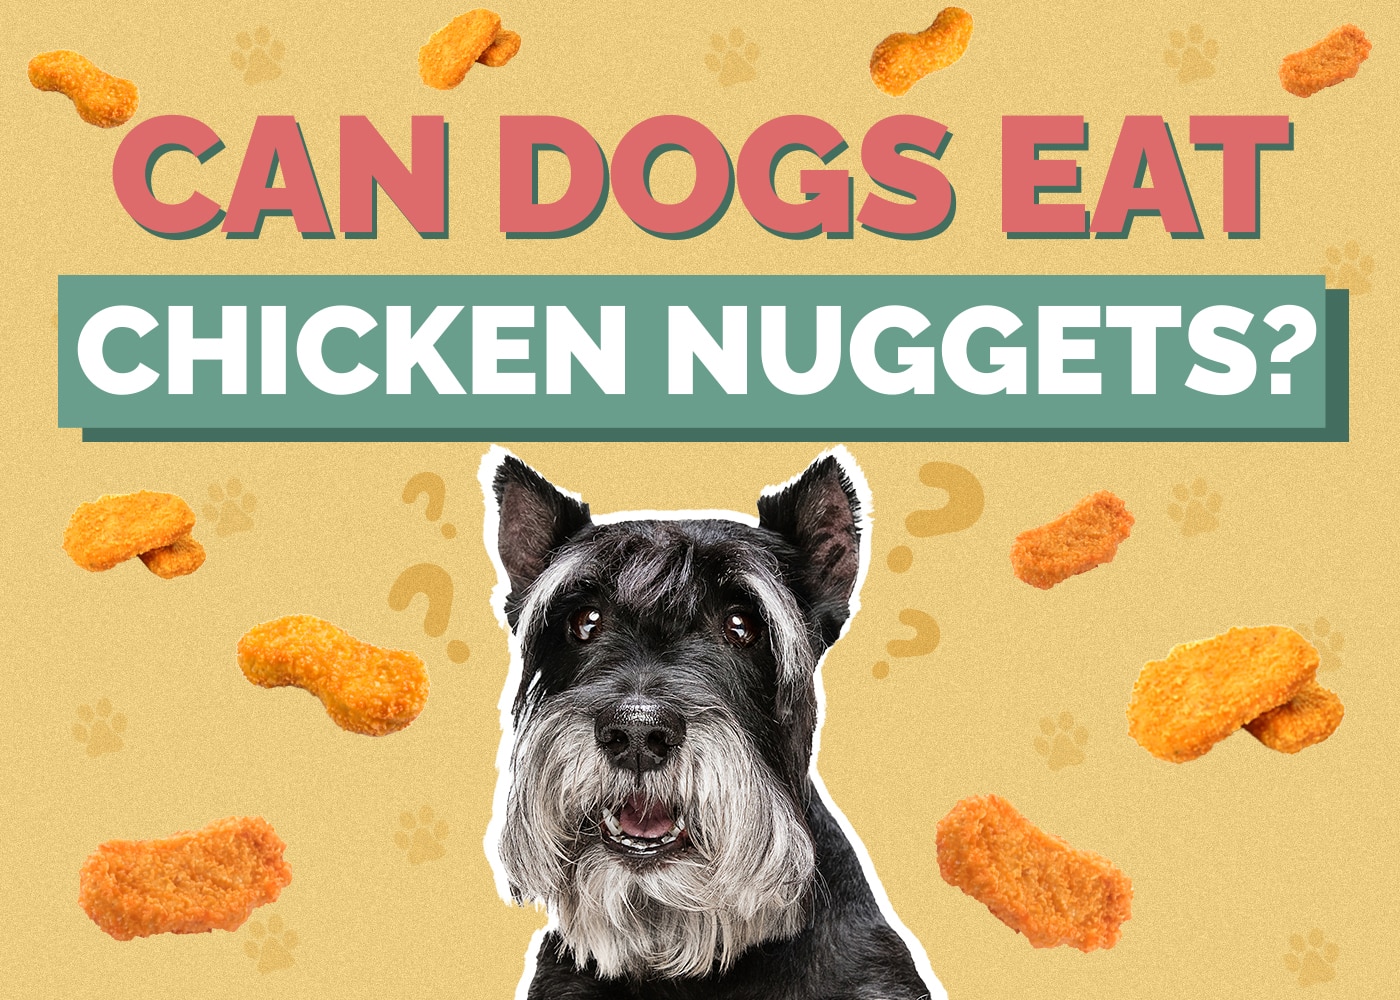 Can Dogs Eat Chicken Nuggets?